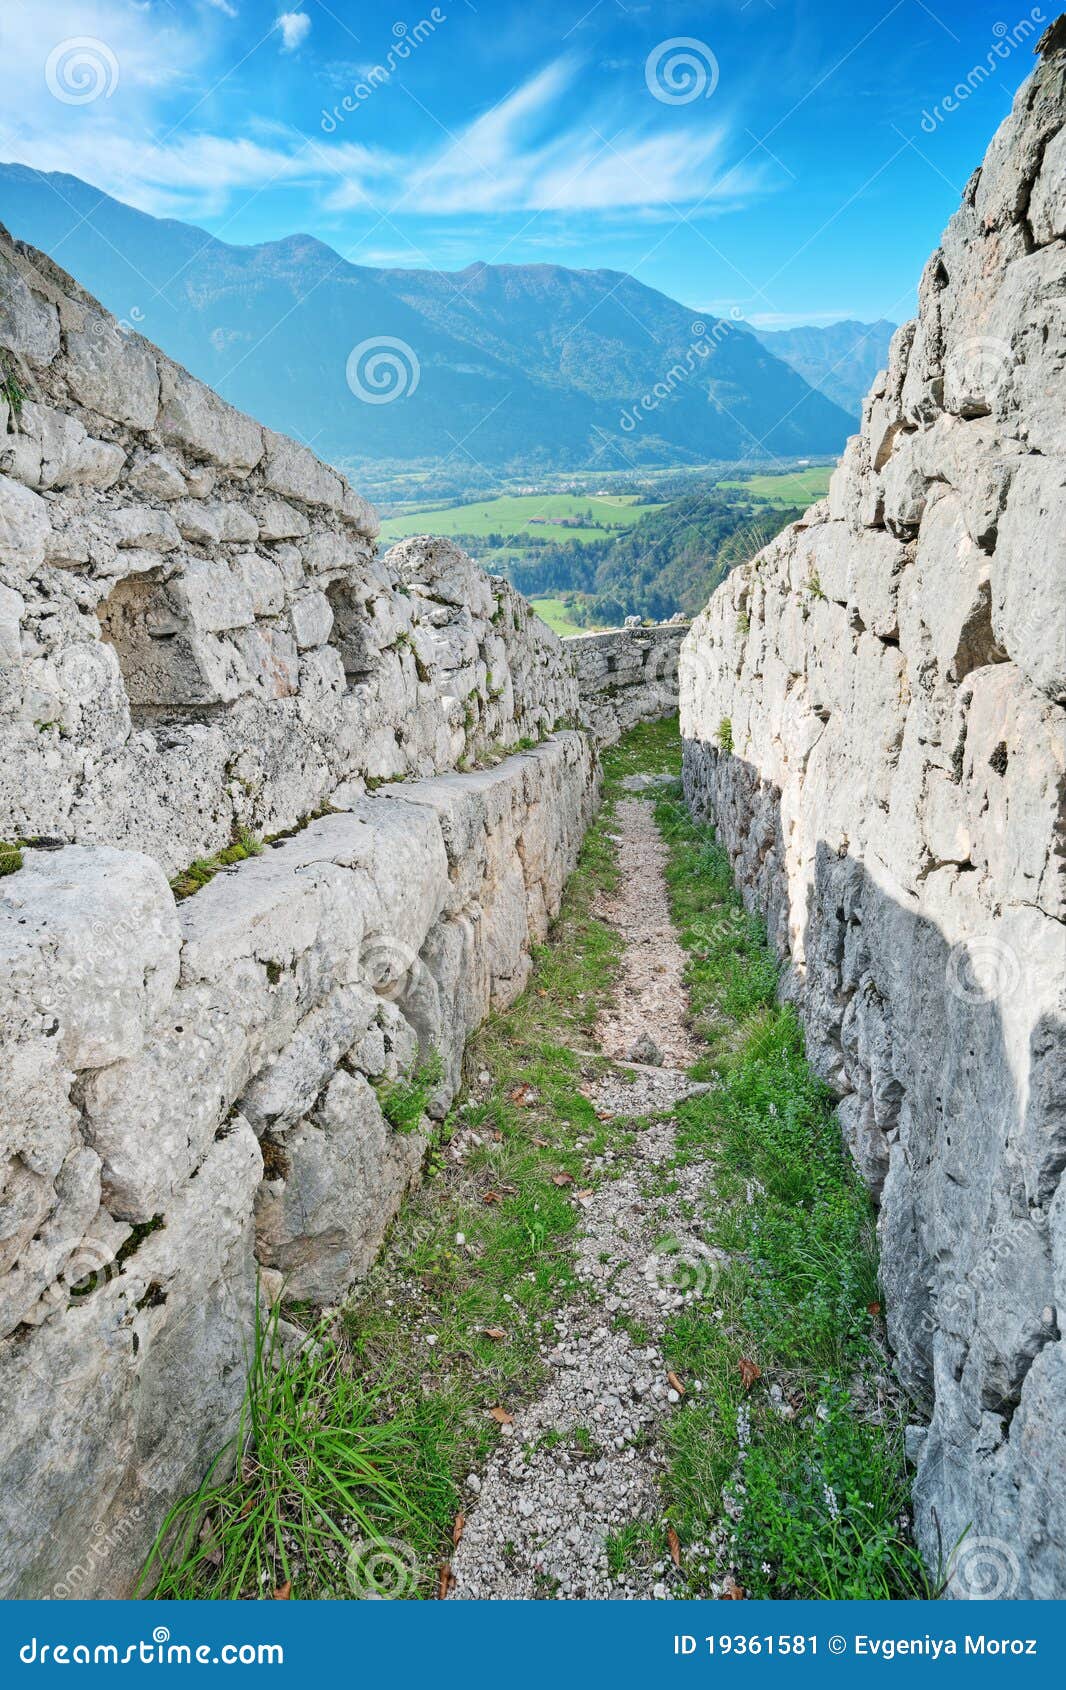 first world war fortifications in alps